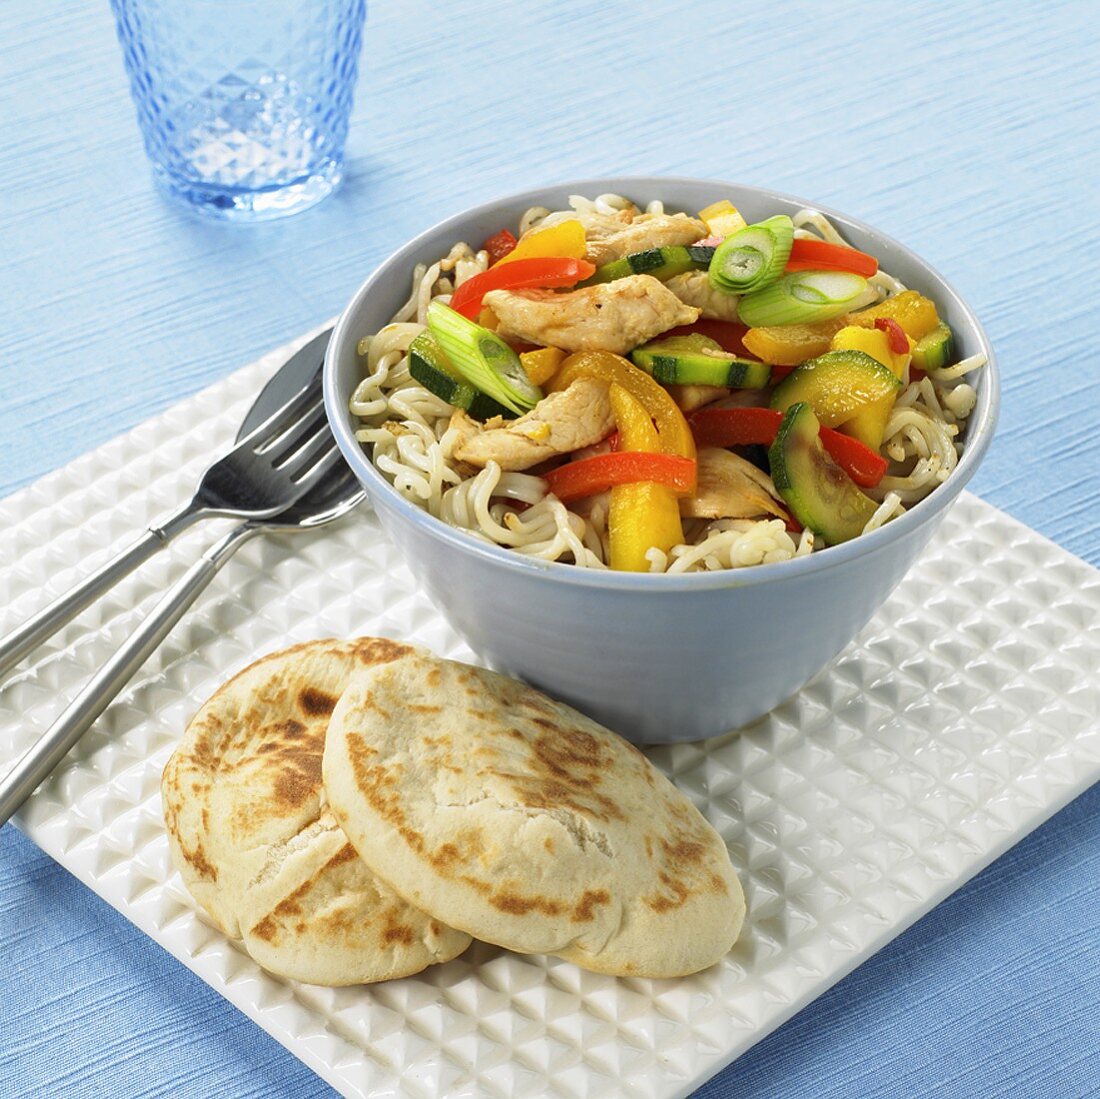 Noodles with chicken and vegetables